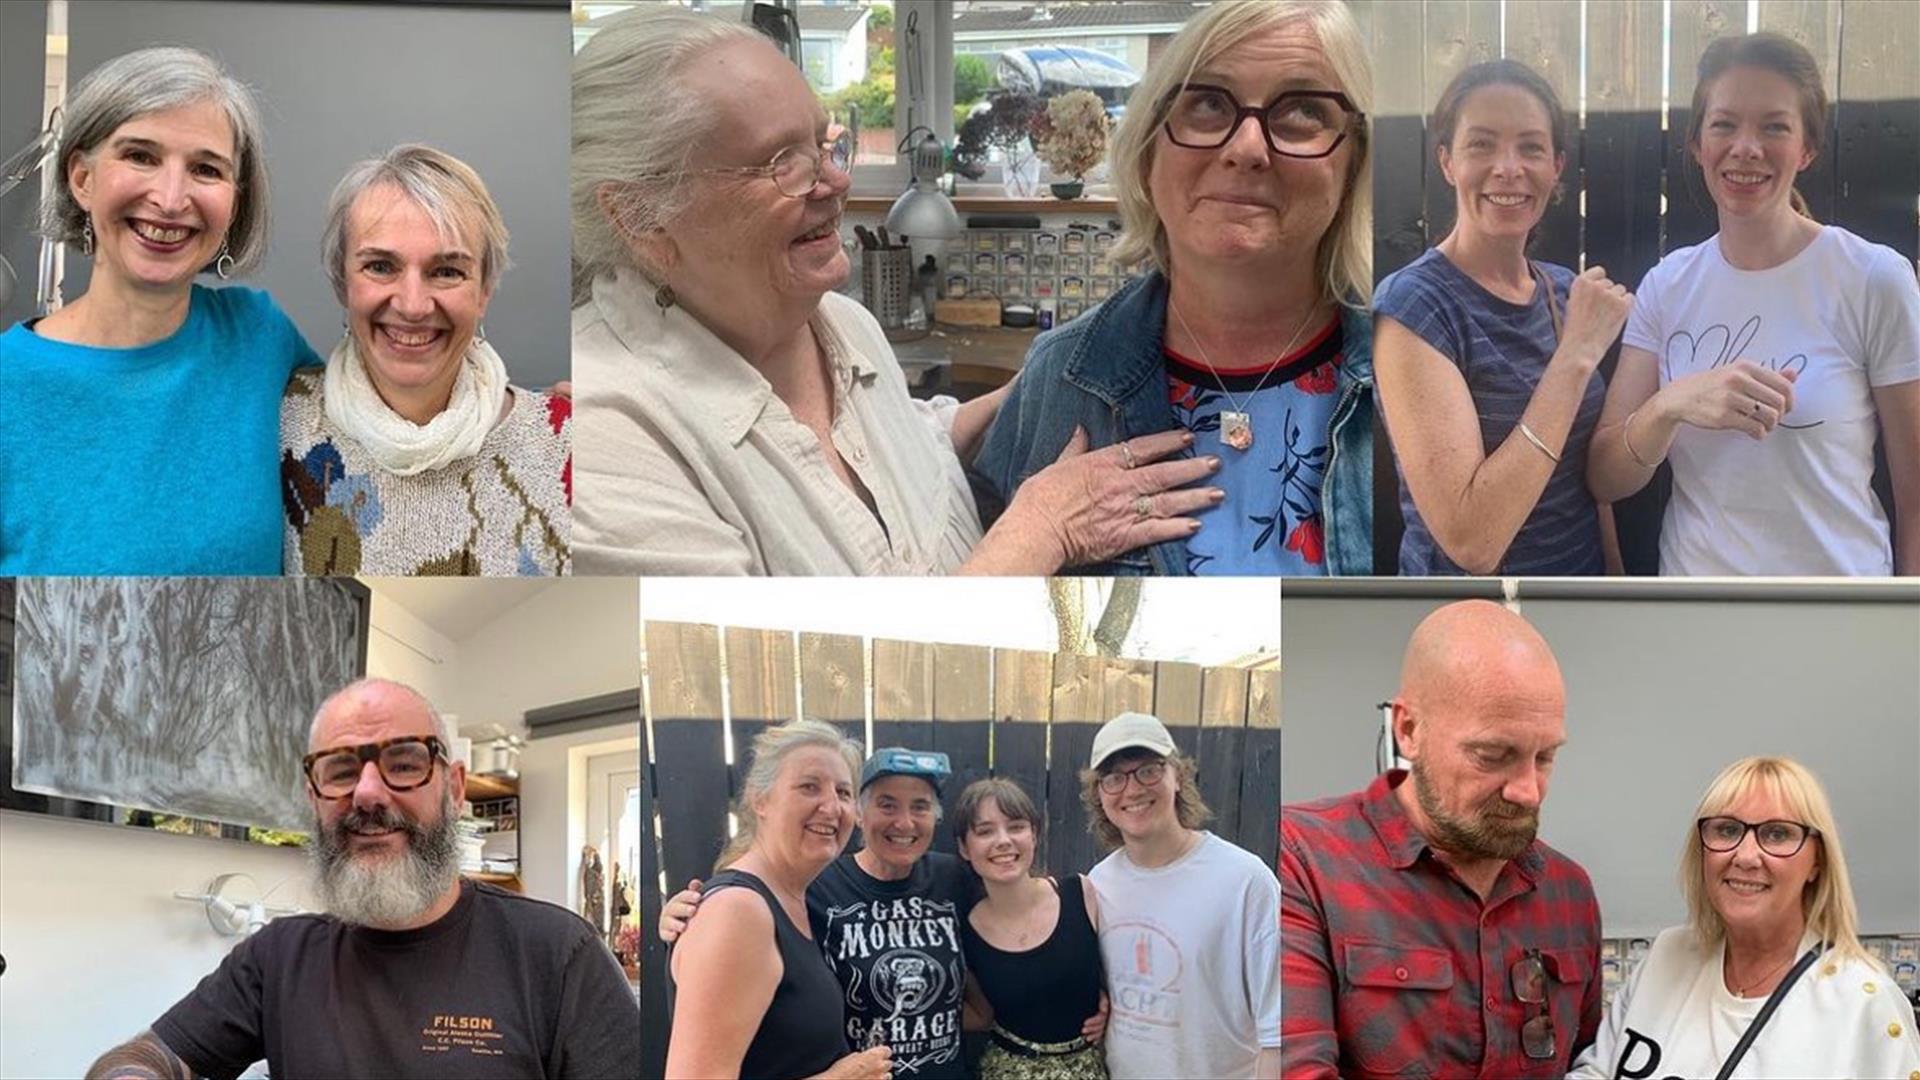 Numerous Jewellery Making groups smiling and pulling funny faces after finishing their jewellery making course in Ruth the goldsmiths studio in Holywo